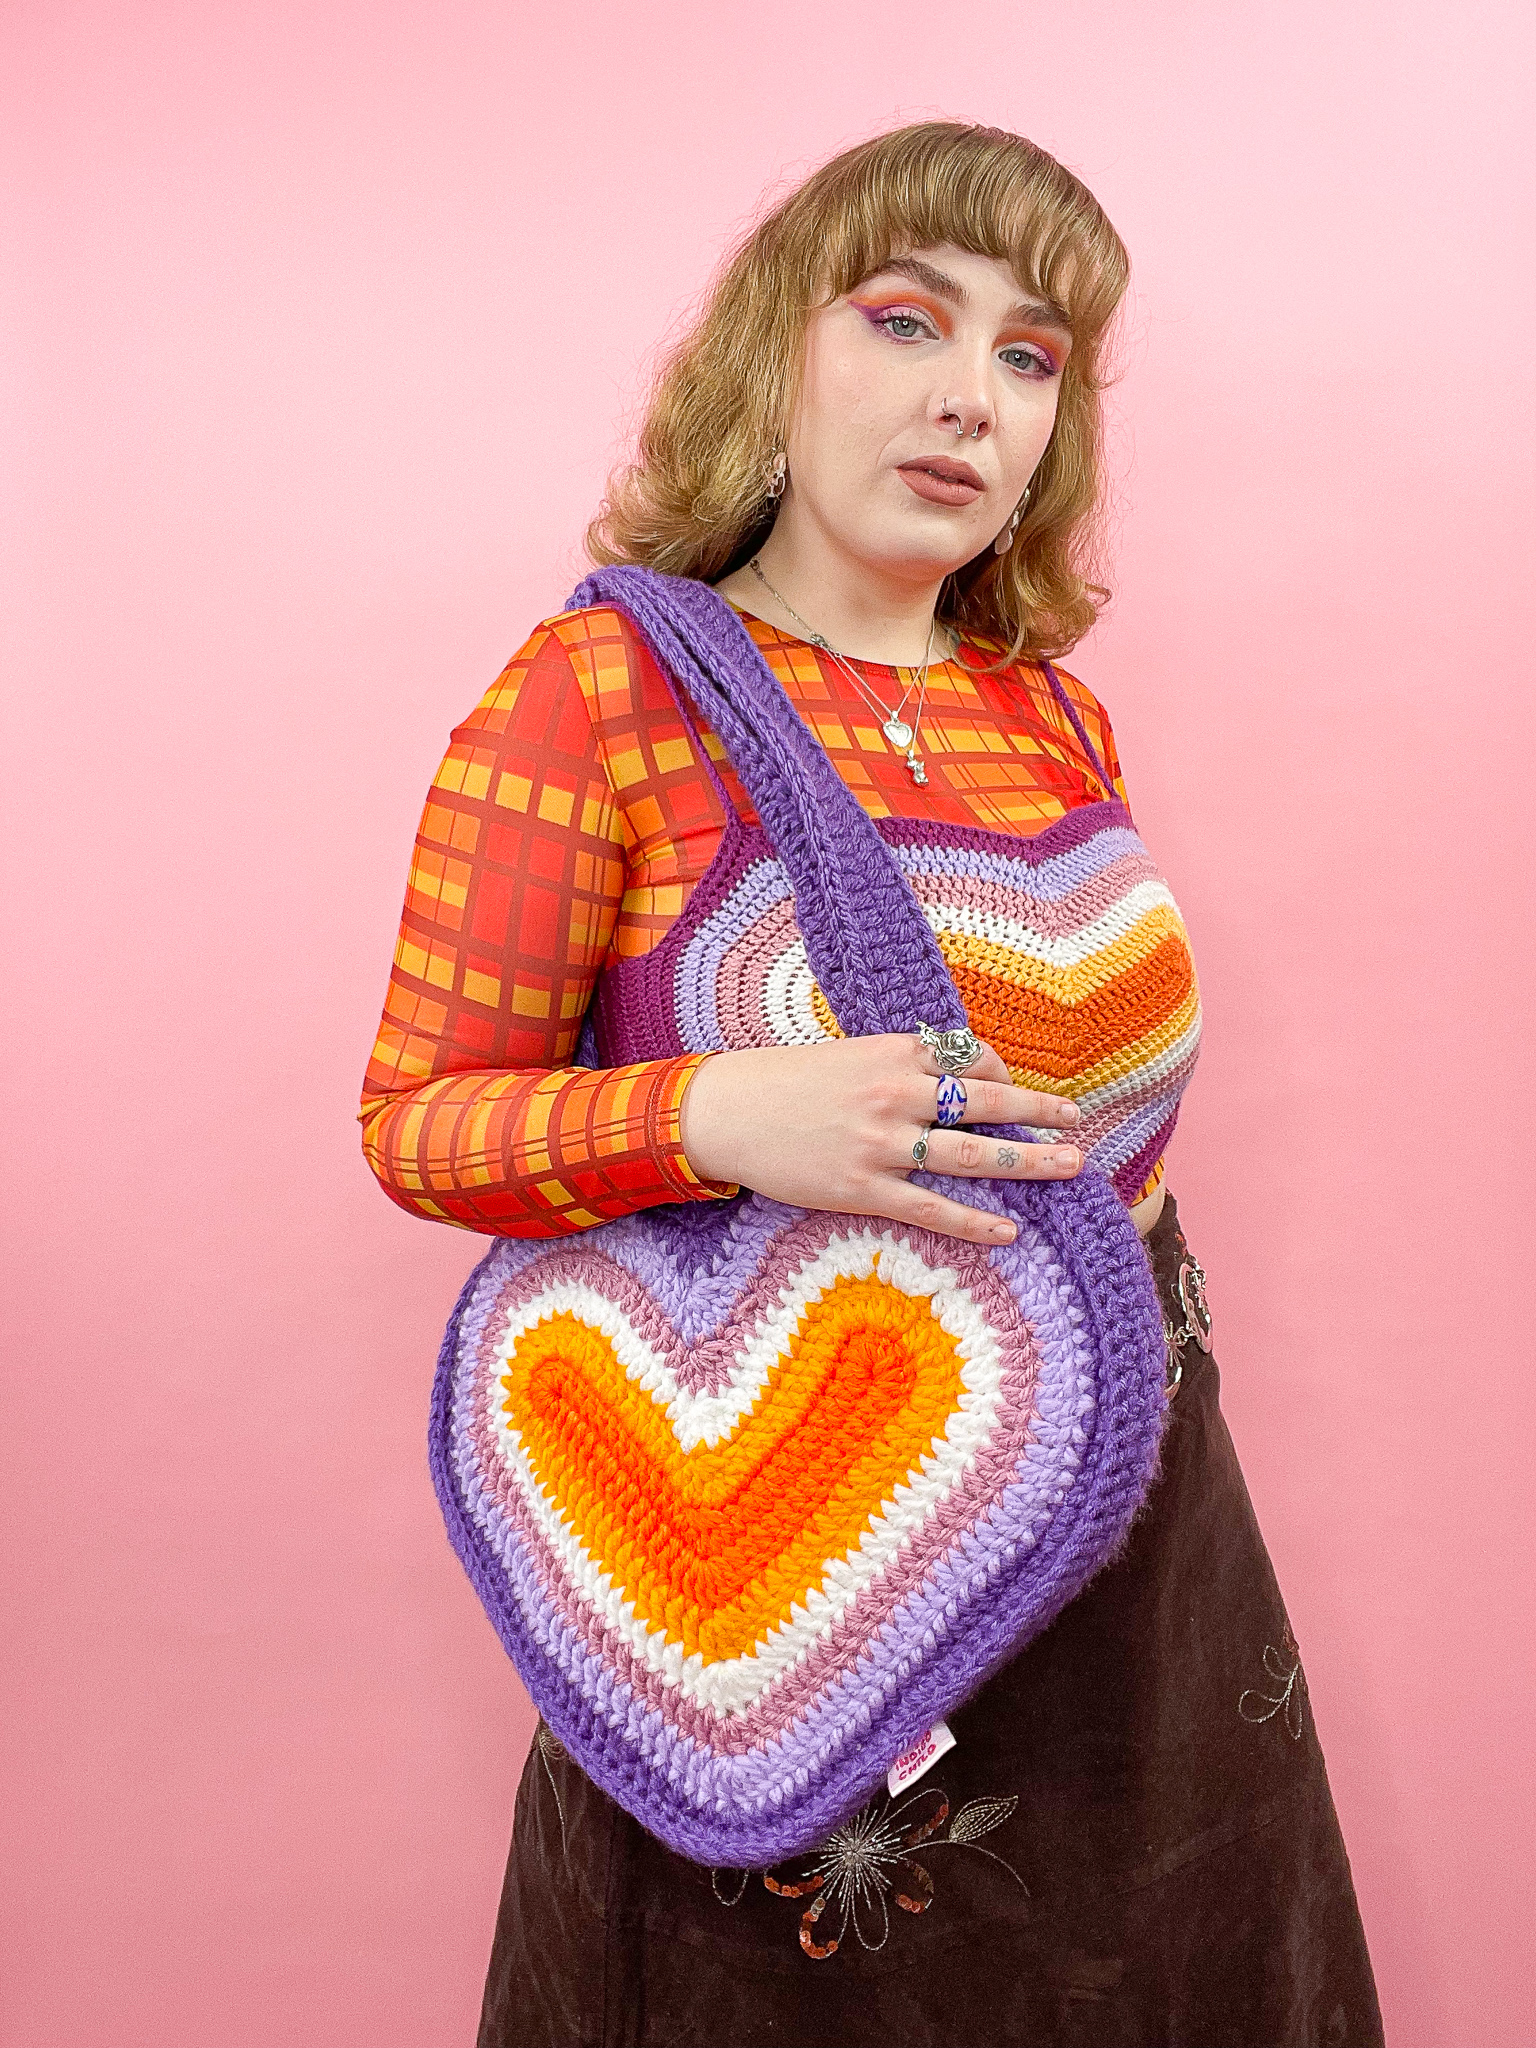 a woman holding a knitted bag